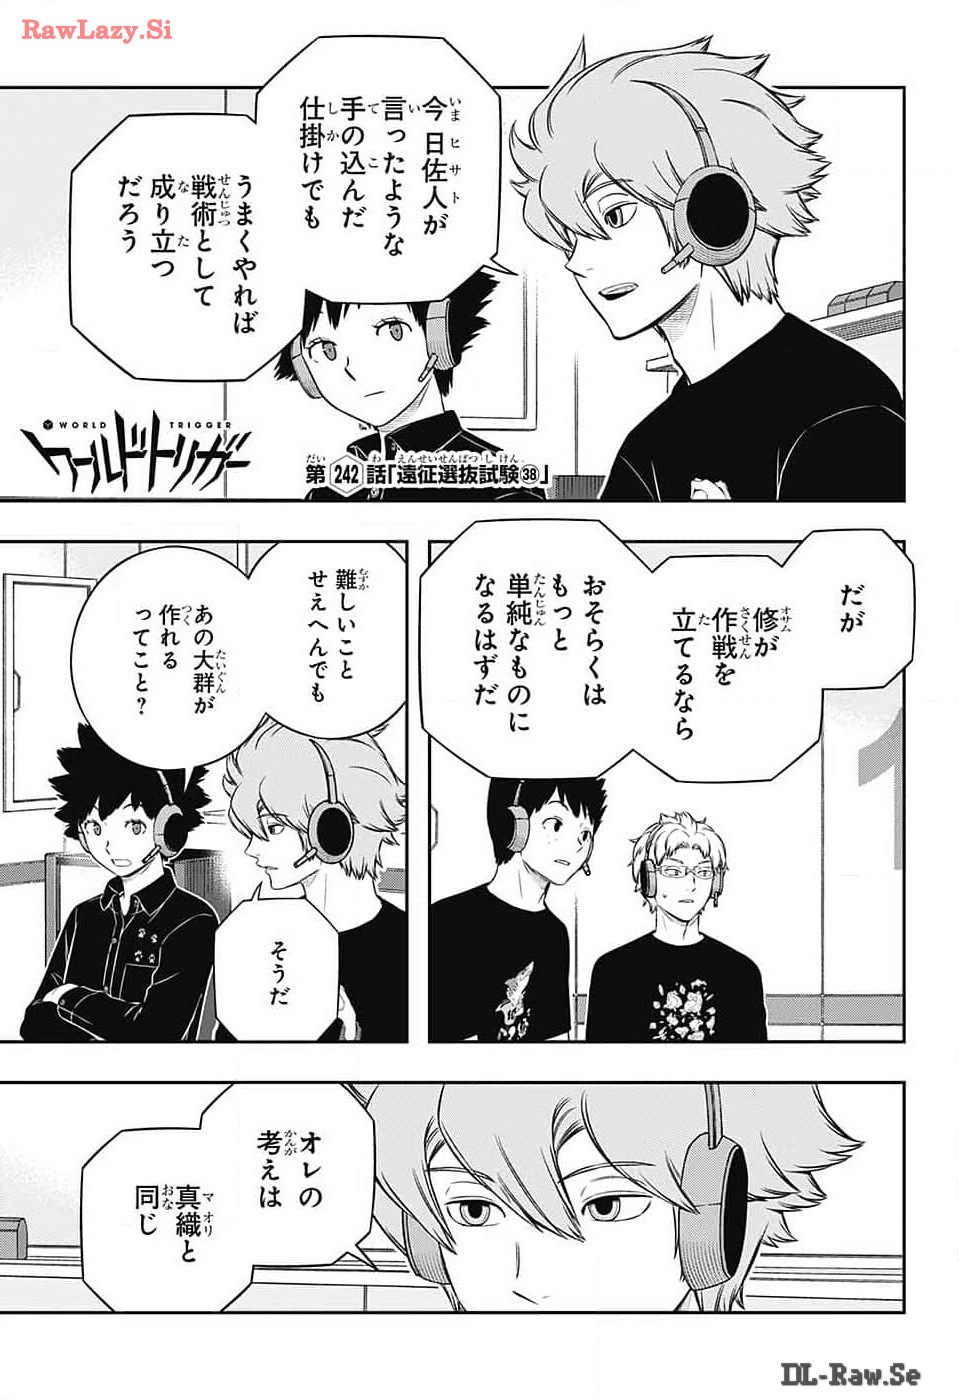 World Trigger - Chapter 242 - Page 1